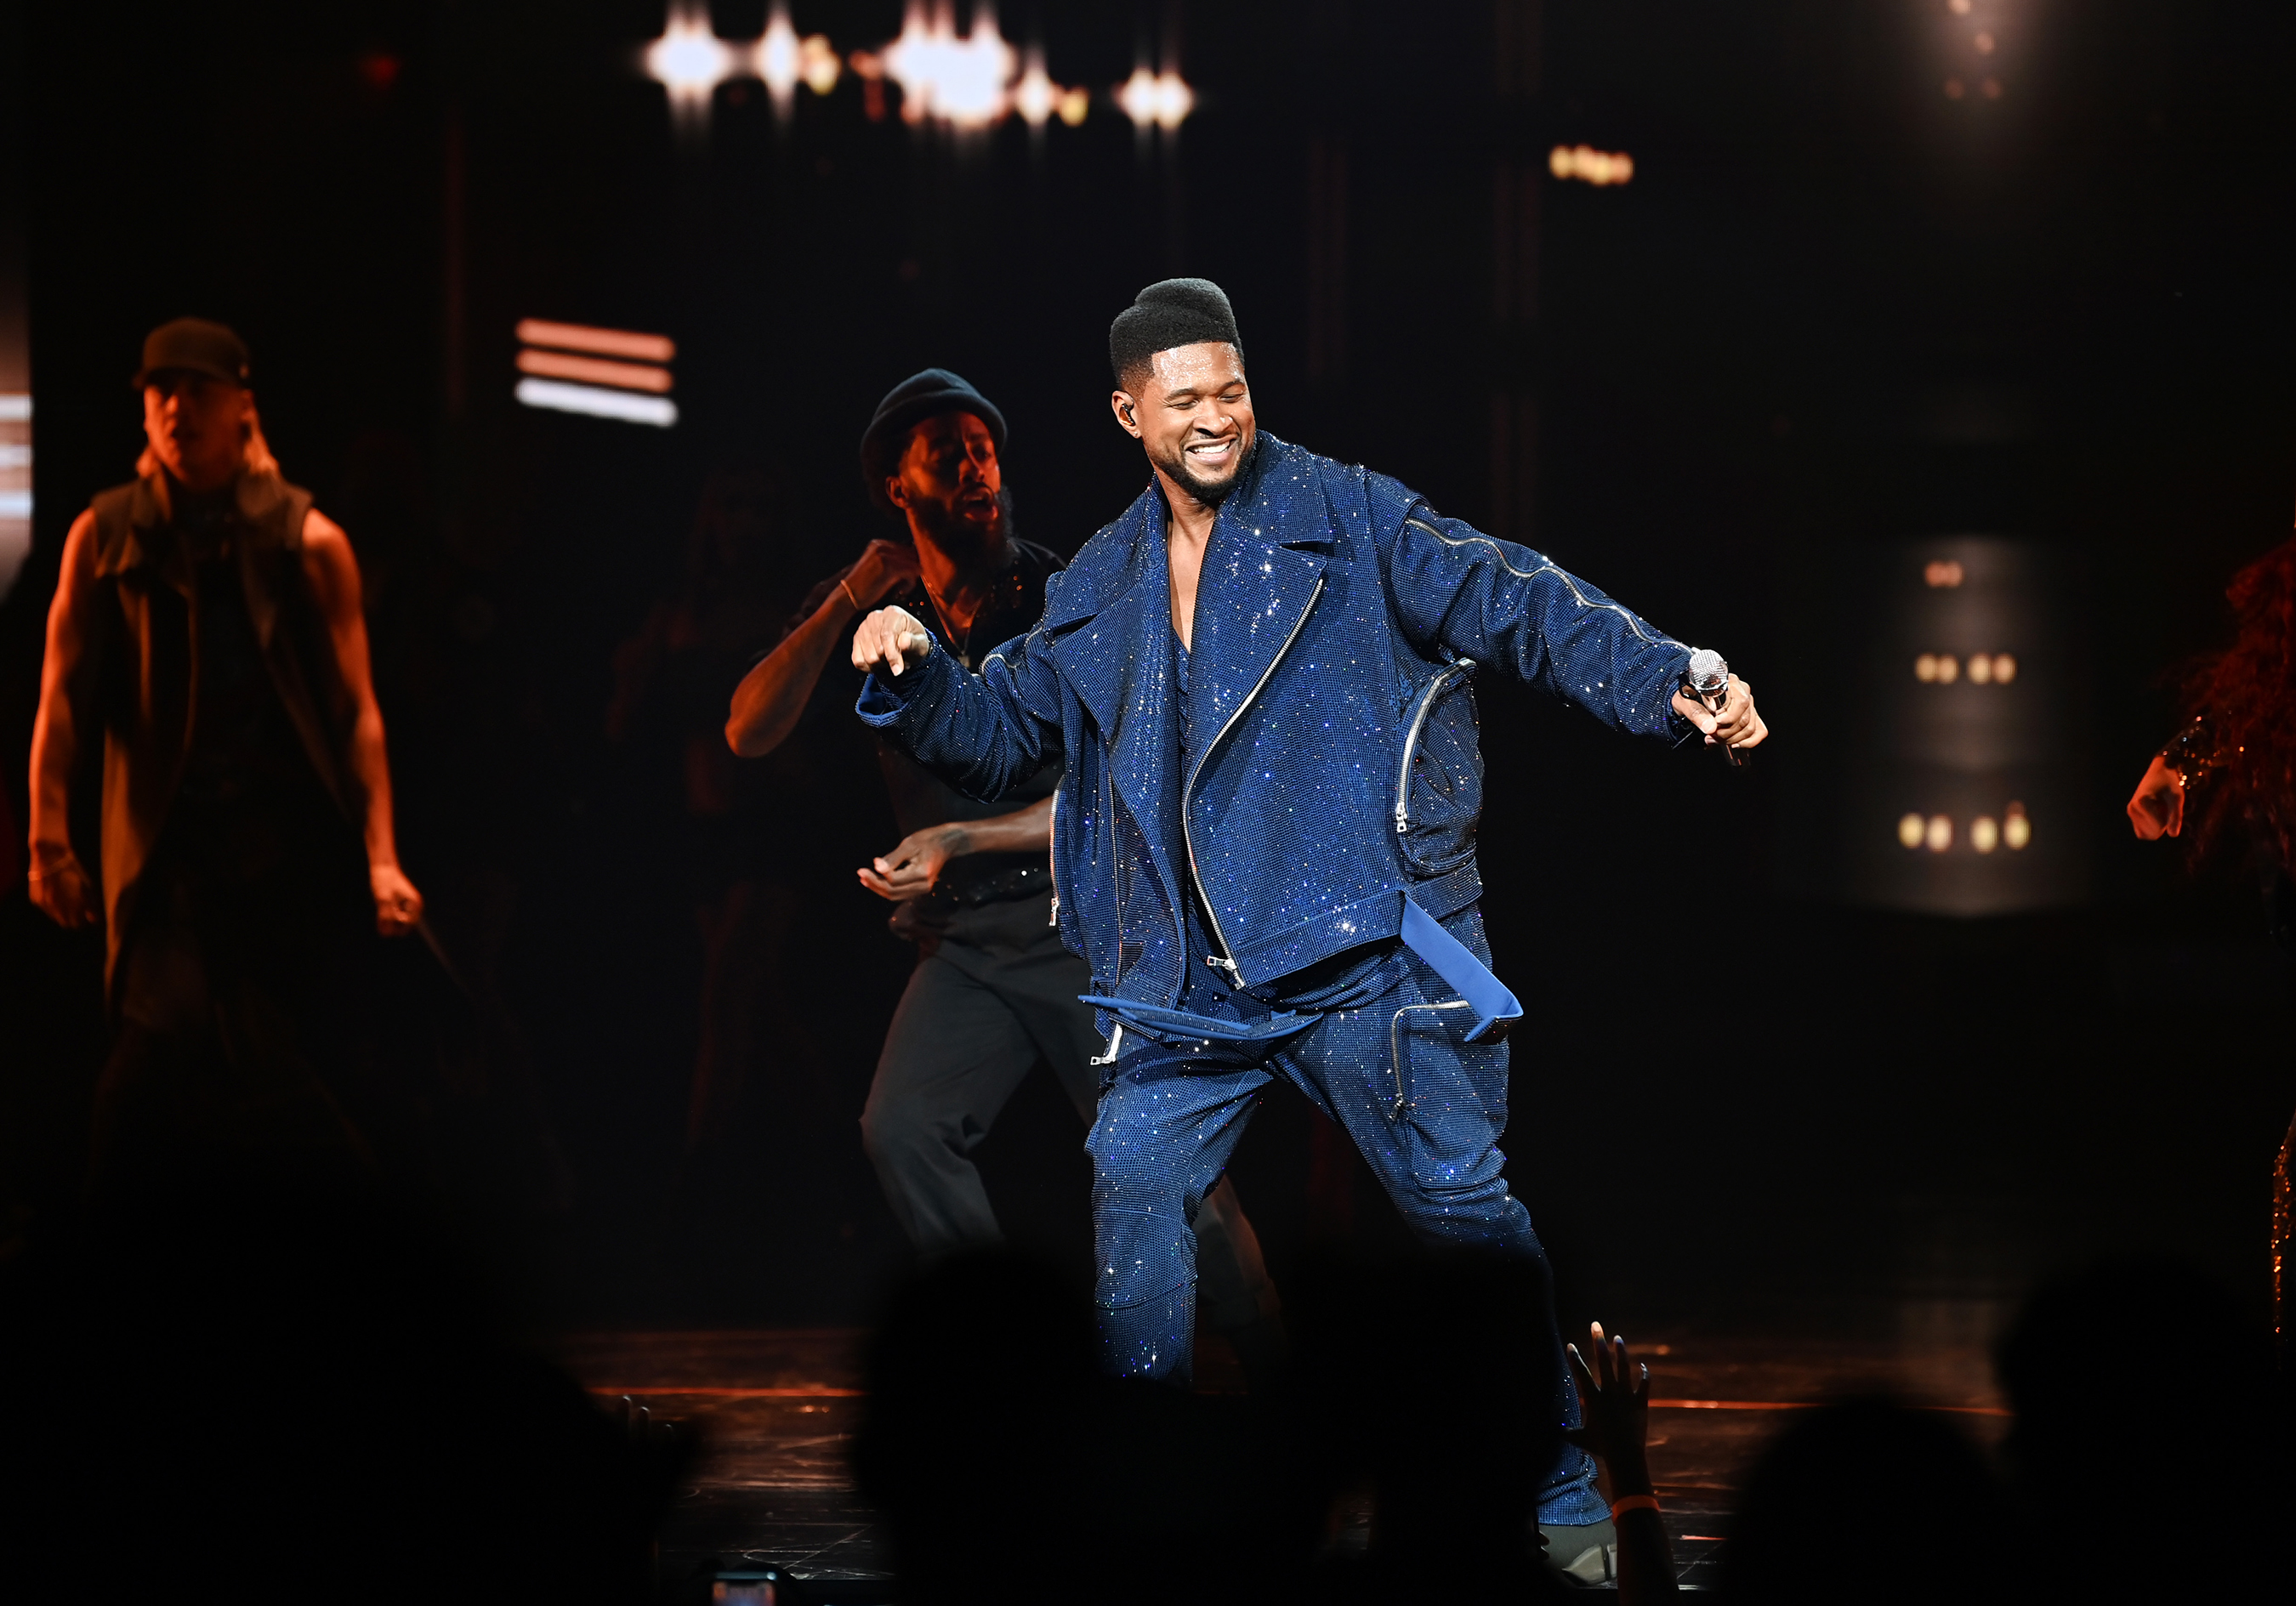 Usher opens Las Vegas residency at The Colosseum at Caesars Palace. Credit: Denise Truscello